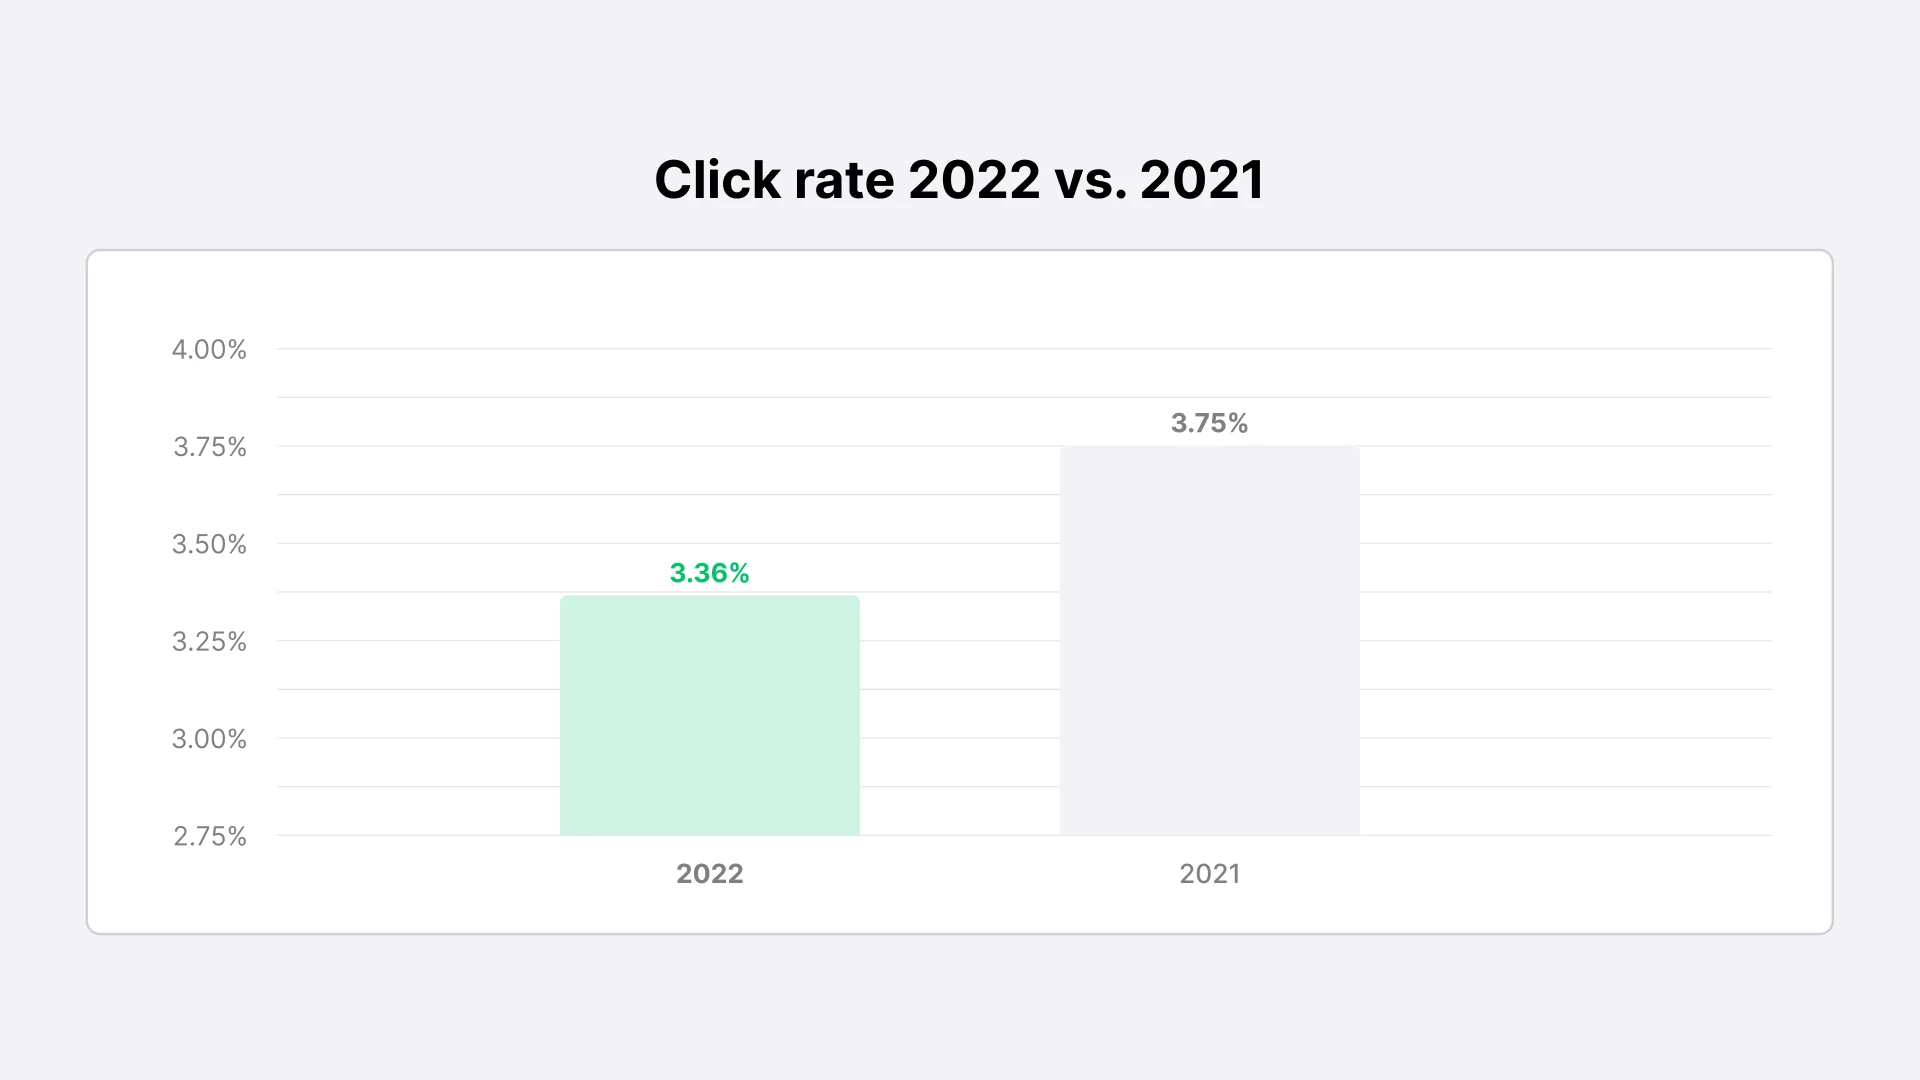 Email click rate 2022 vs 2021